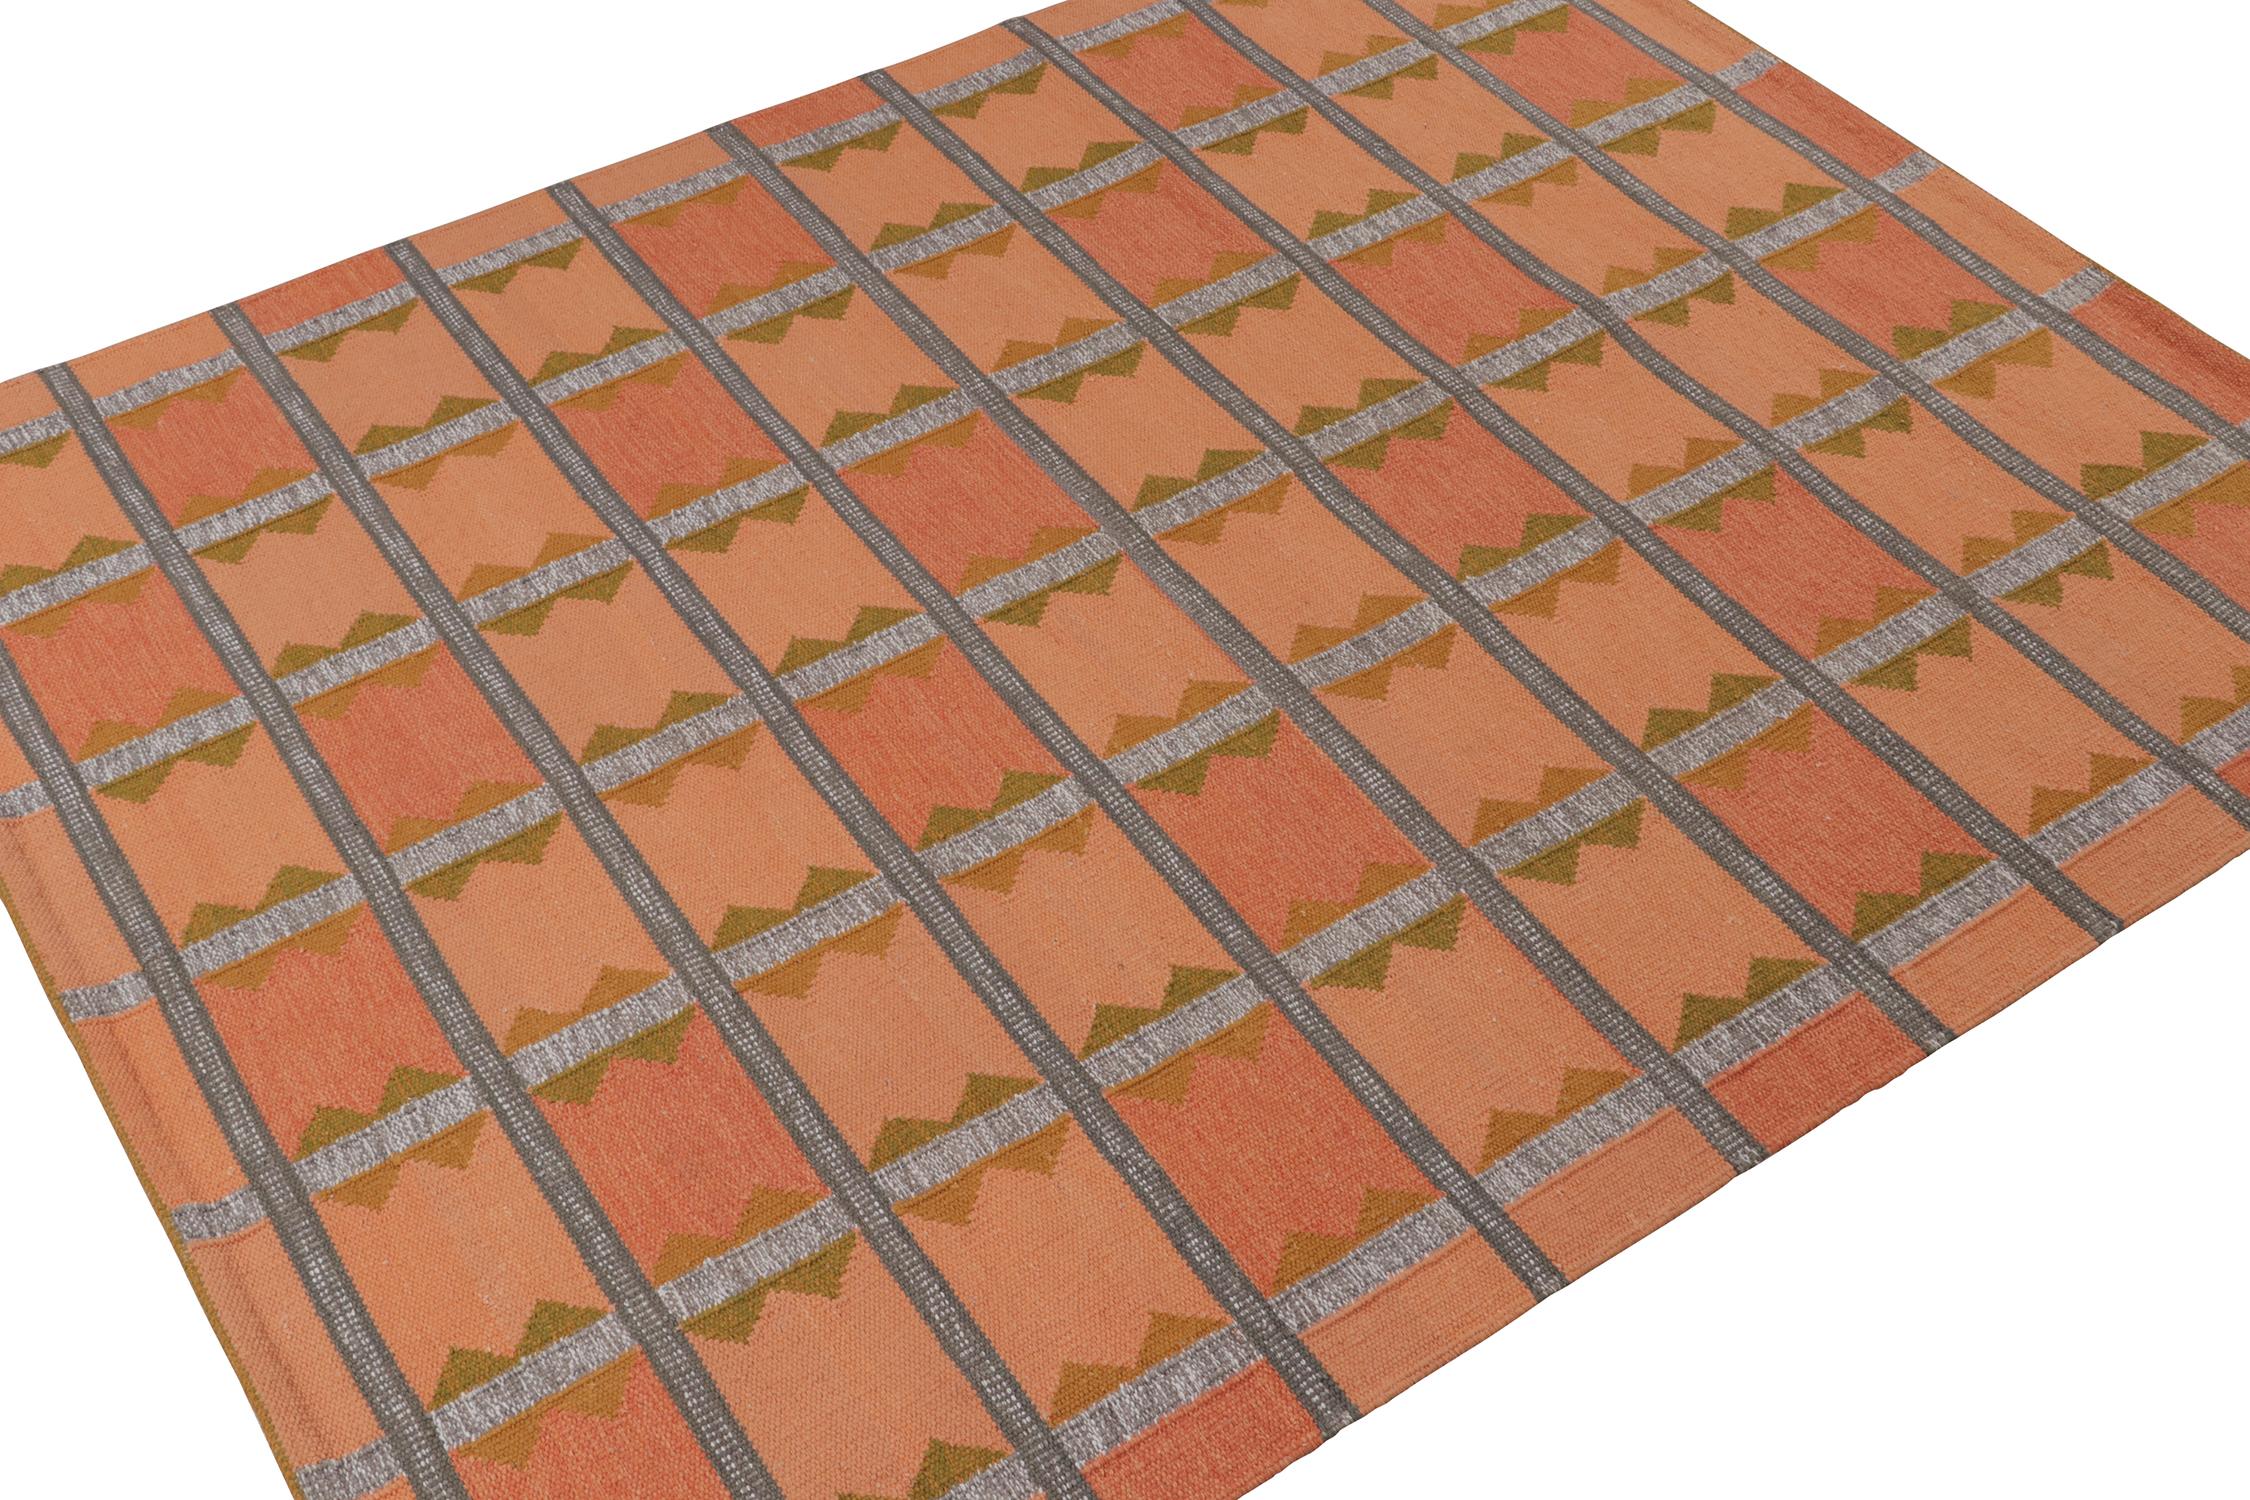 This smart 8x10 Swedish style kilim is the next addition to Rug & Kilim's award-winning Scandinavian flat weave collection. Handwoven in cotton. 
Further On the Design: 
This rug enjoys geometric patterns in peachy orange and pink, gray, and brown